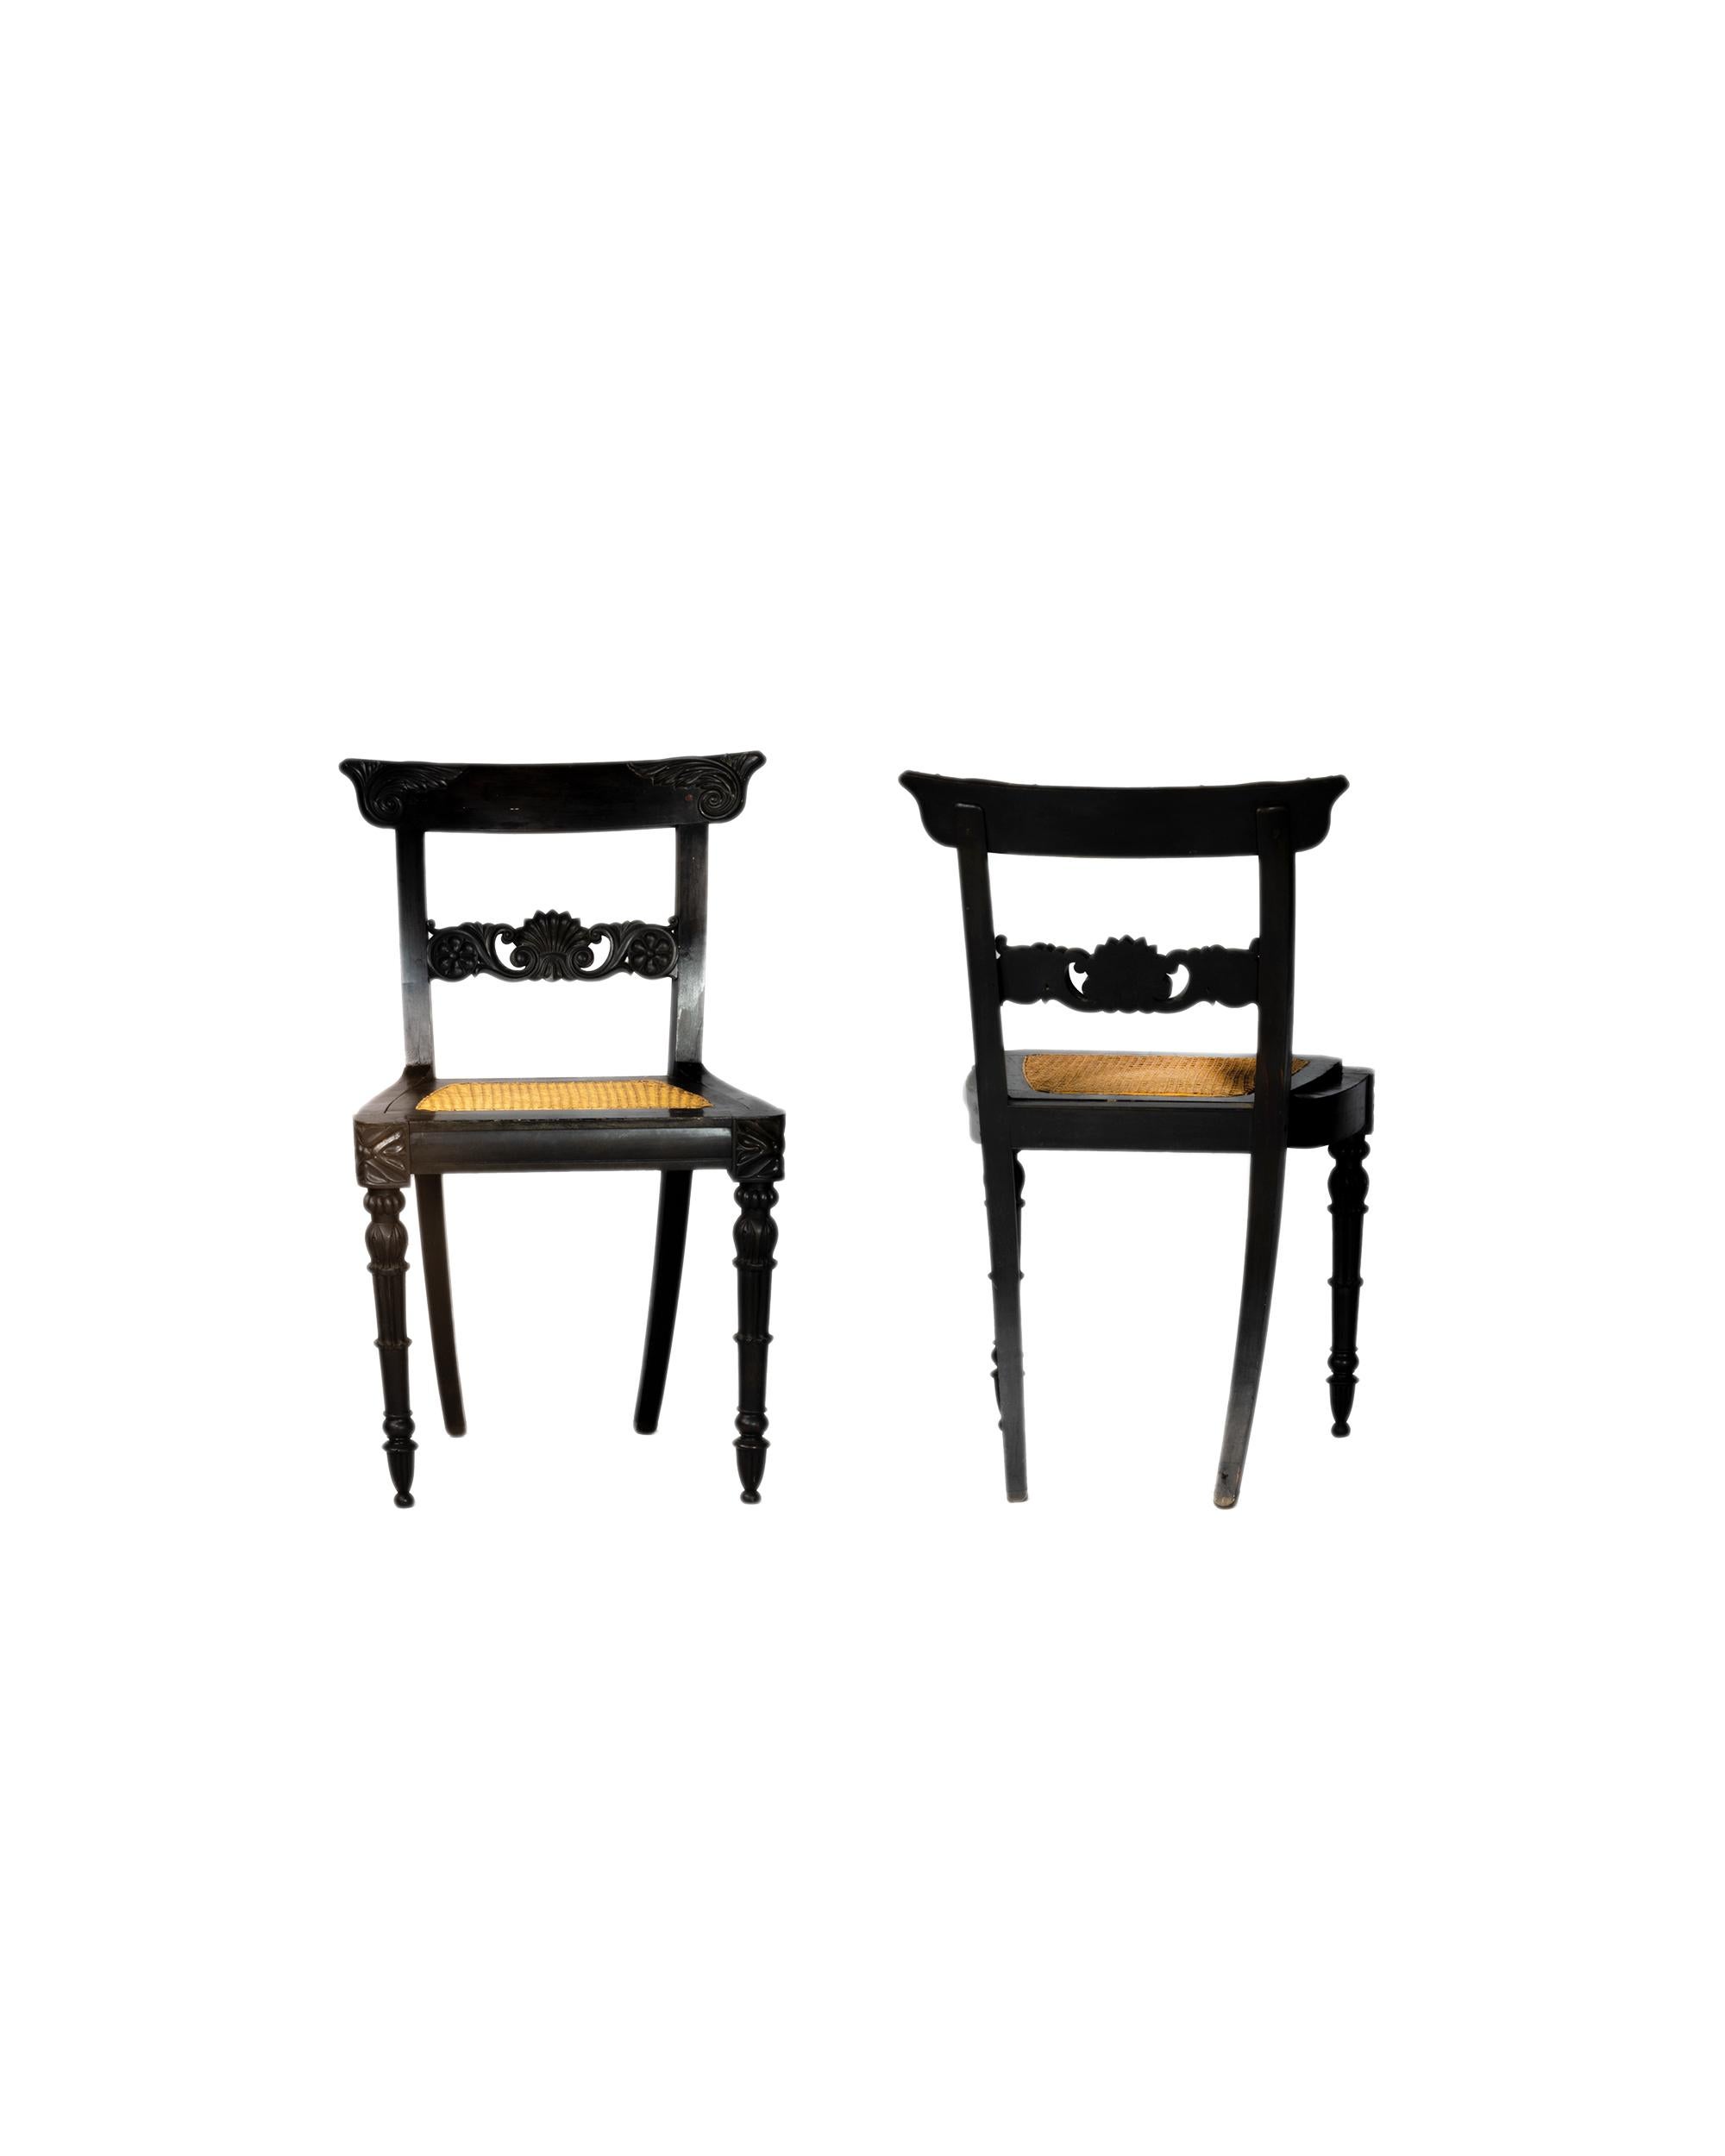 A fine set of two Anglo-Indian Ceylonese solid ebony chairs, horizontal splats with floral motifs standing on reeded front legs and plain back and caned seats. 
The chairs' reeded frames add texture, the horizontal splats showcase intricate floral